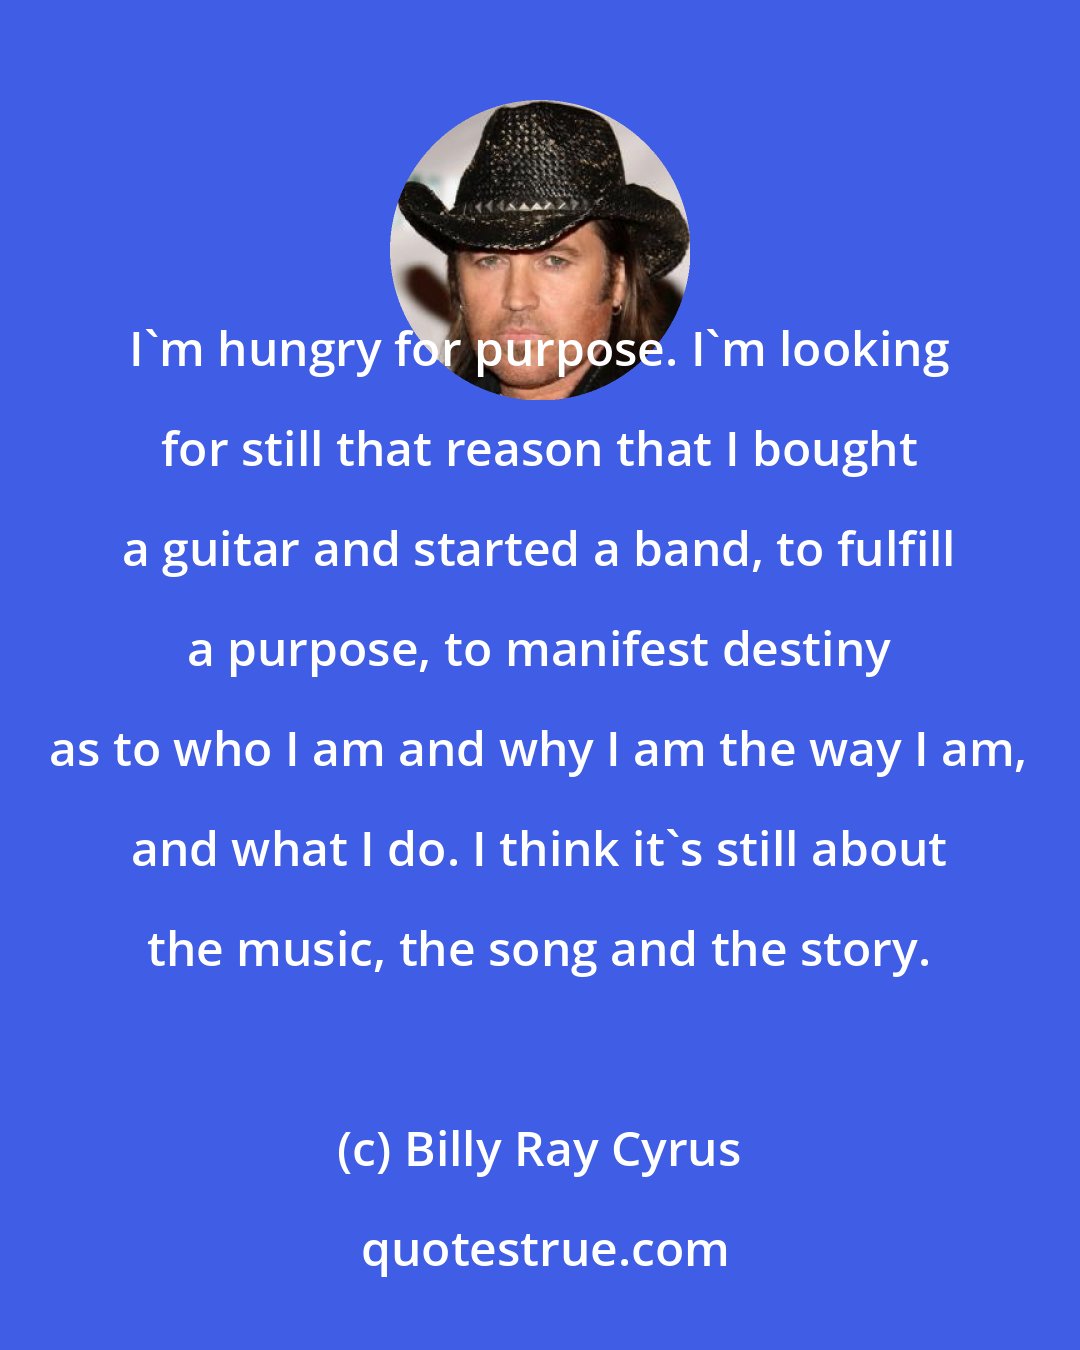 Billy Ray Cyrus: I'm hungry for purpose. I'm looking for still that reason that I bought a guitar and started a band, to fulfill a purpose, to manifest destiny as to who I am and why I am the way I am, and what I do. I think it's still about the music, the song and the story.